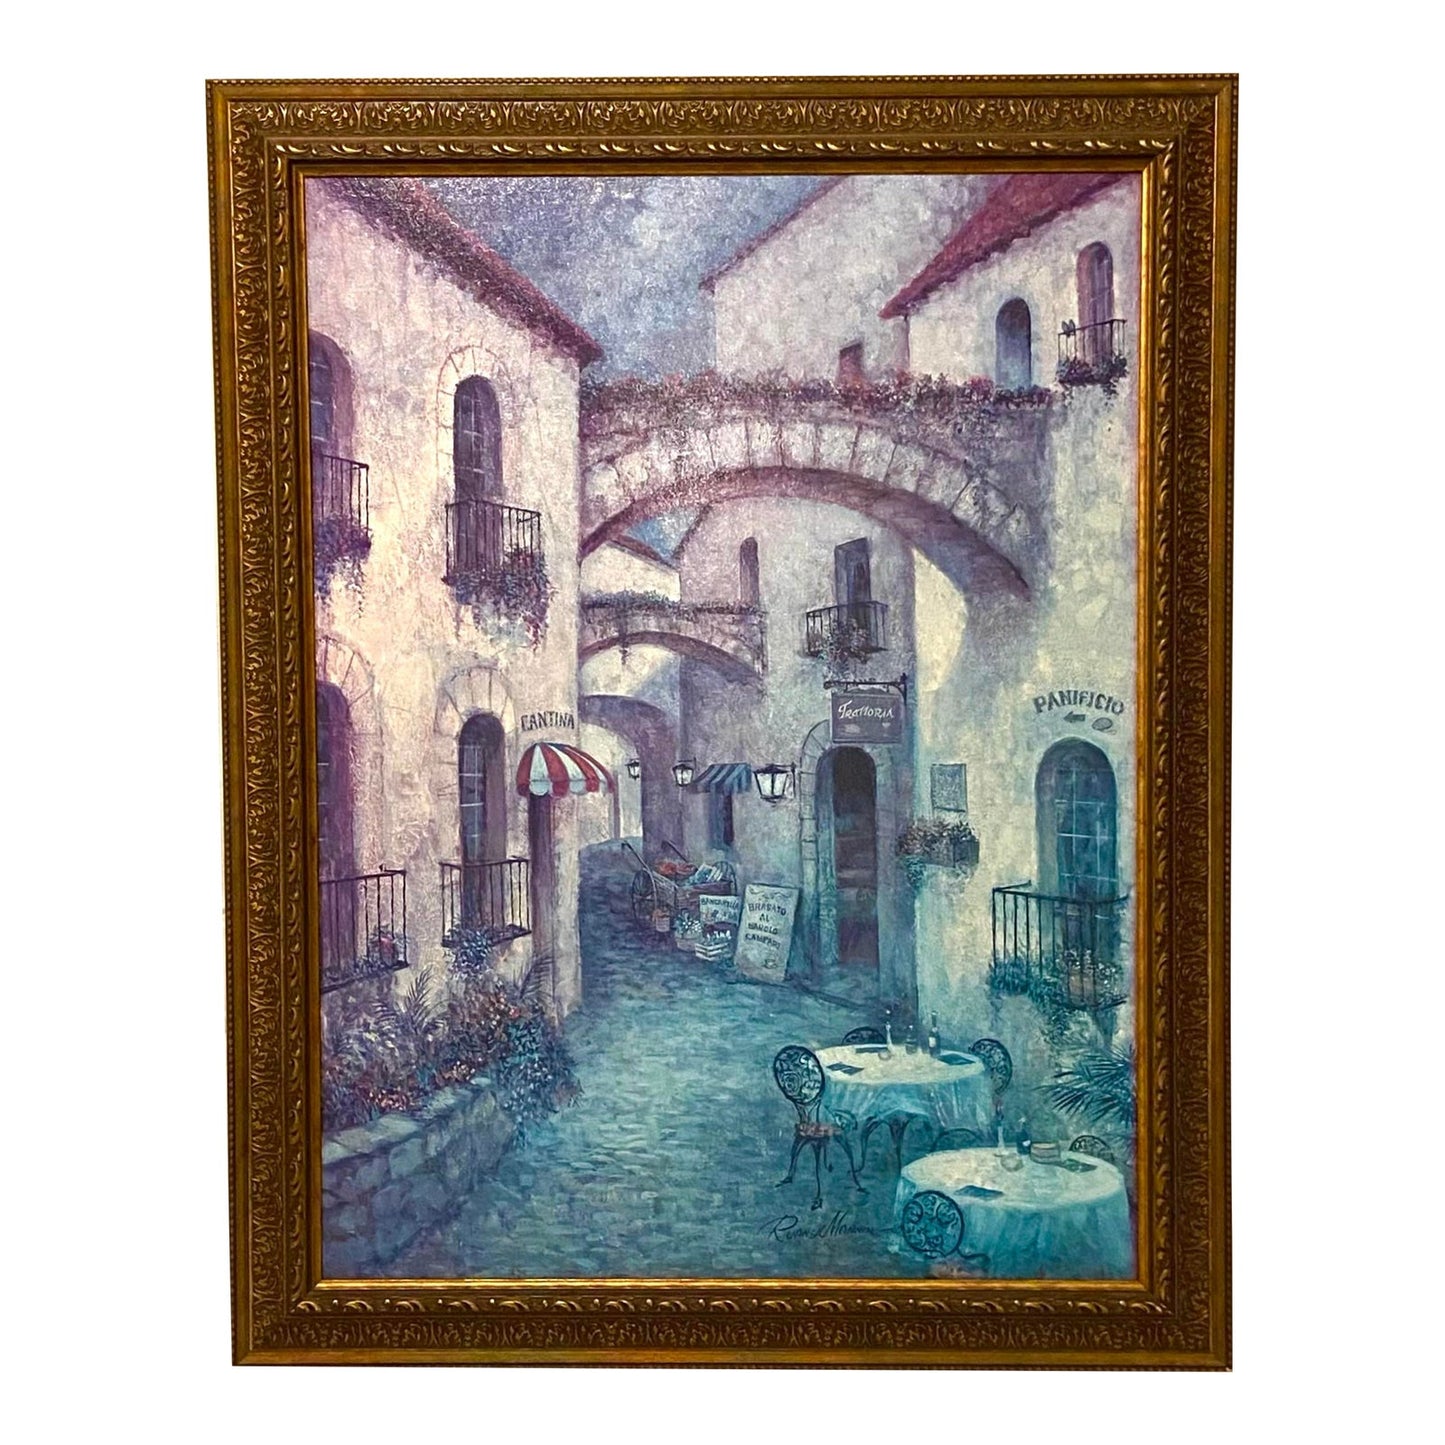 [SOLD] Large Scale Italian Village Cafe Framed Painting Giclee